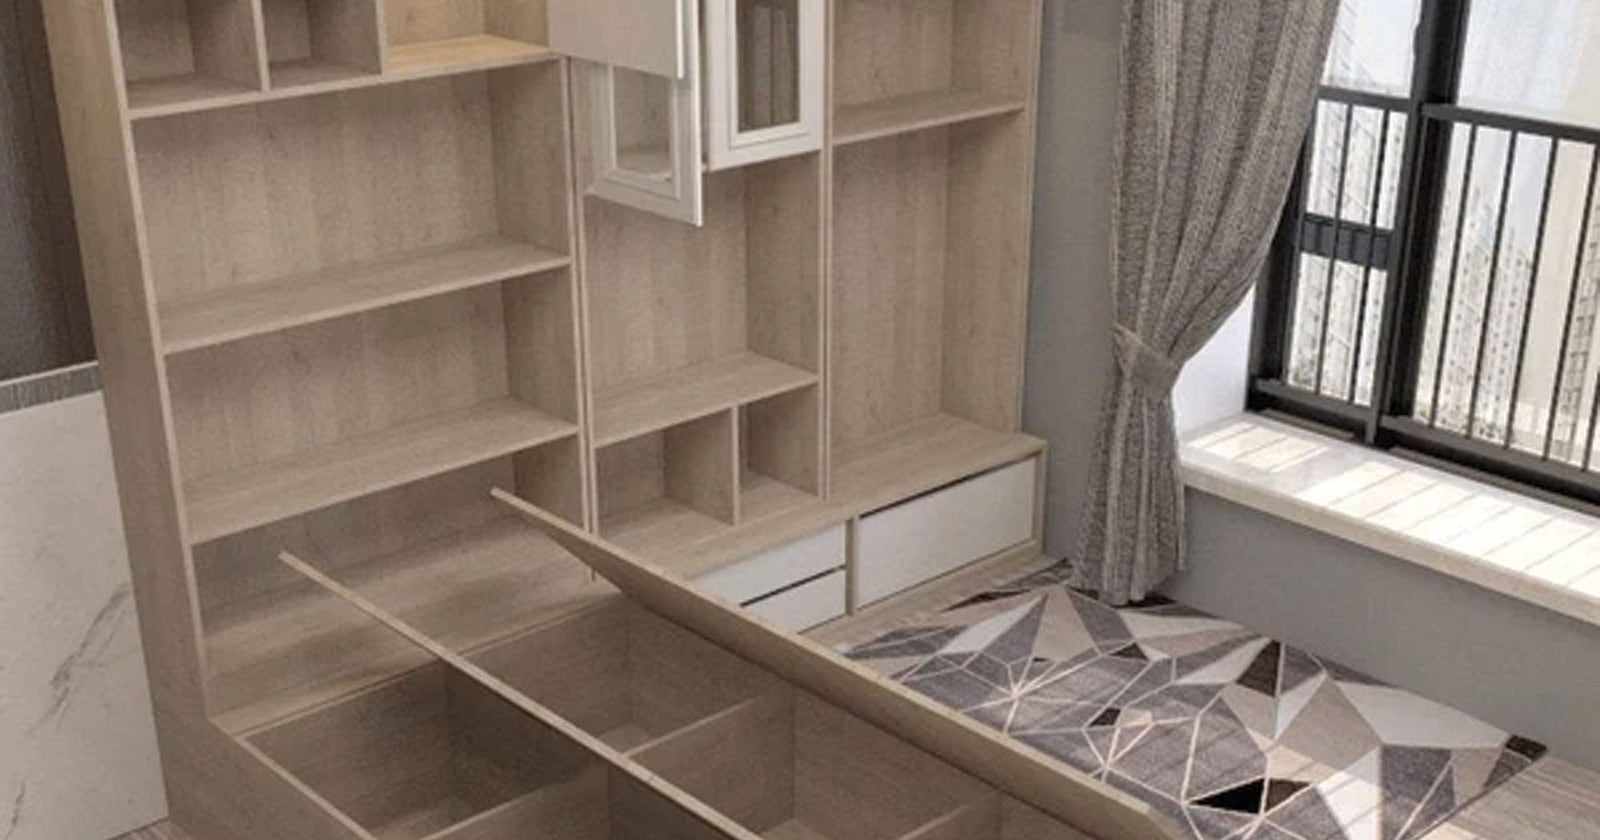 Wardrobes with Integrated Shoe Racks: How can you efficiently